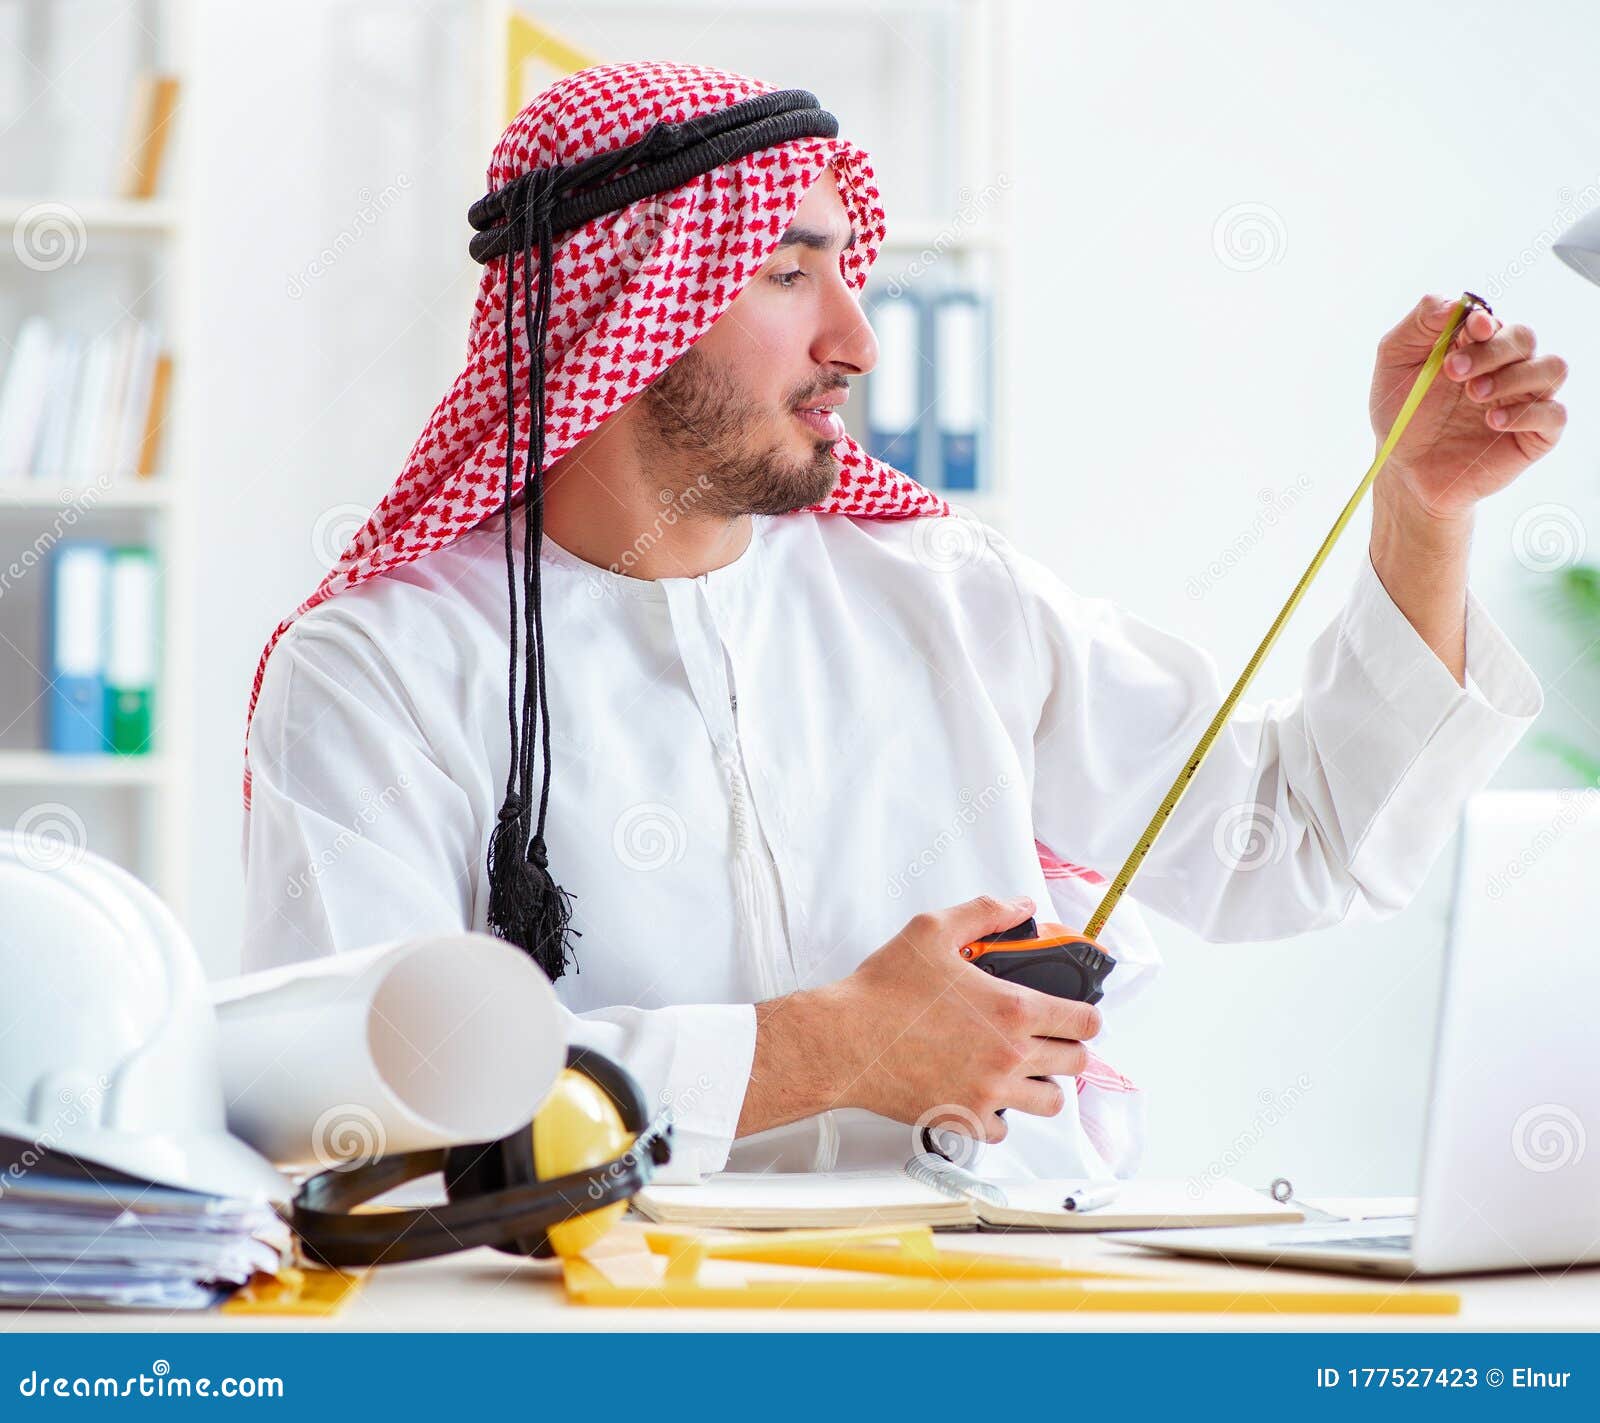 Arab Engineer Working On New Project Stock Image Image of businessman